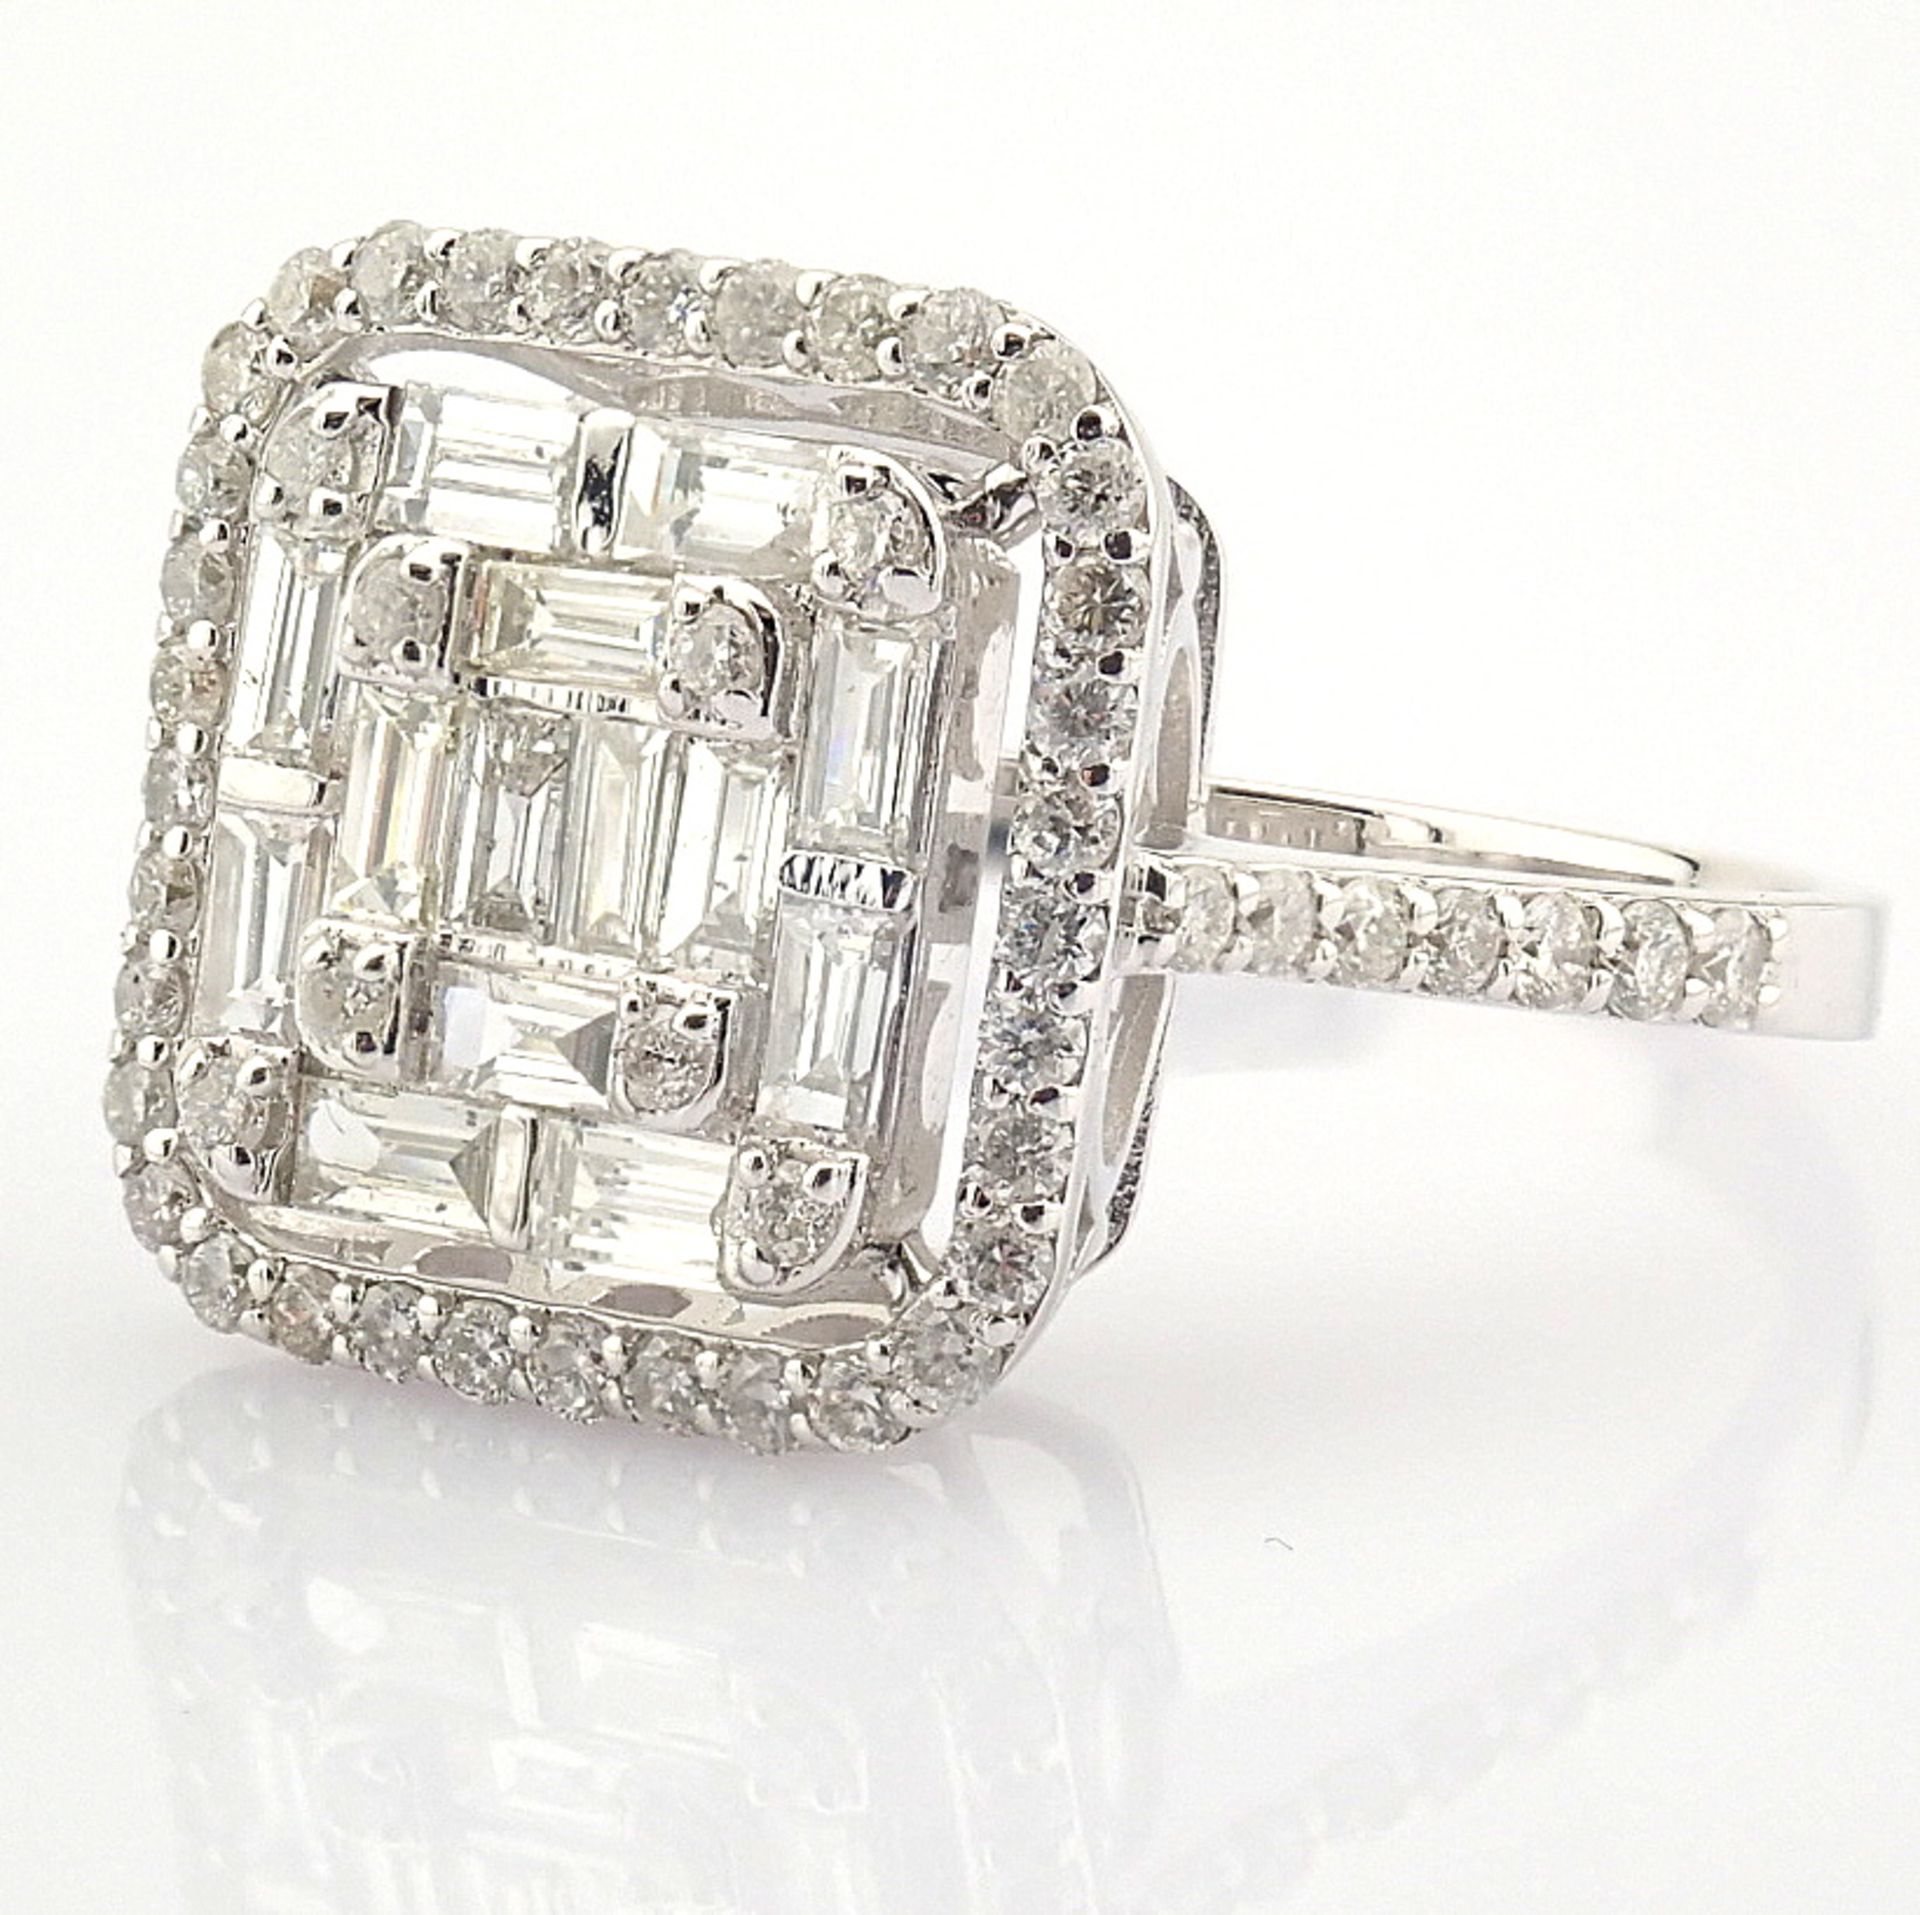 Certificated 14K White Gold Diamond Ring / Total 0.99 ct - Image 3 of 5